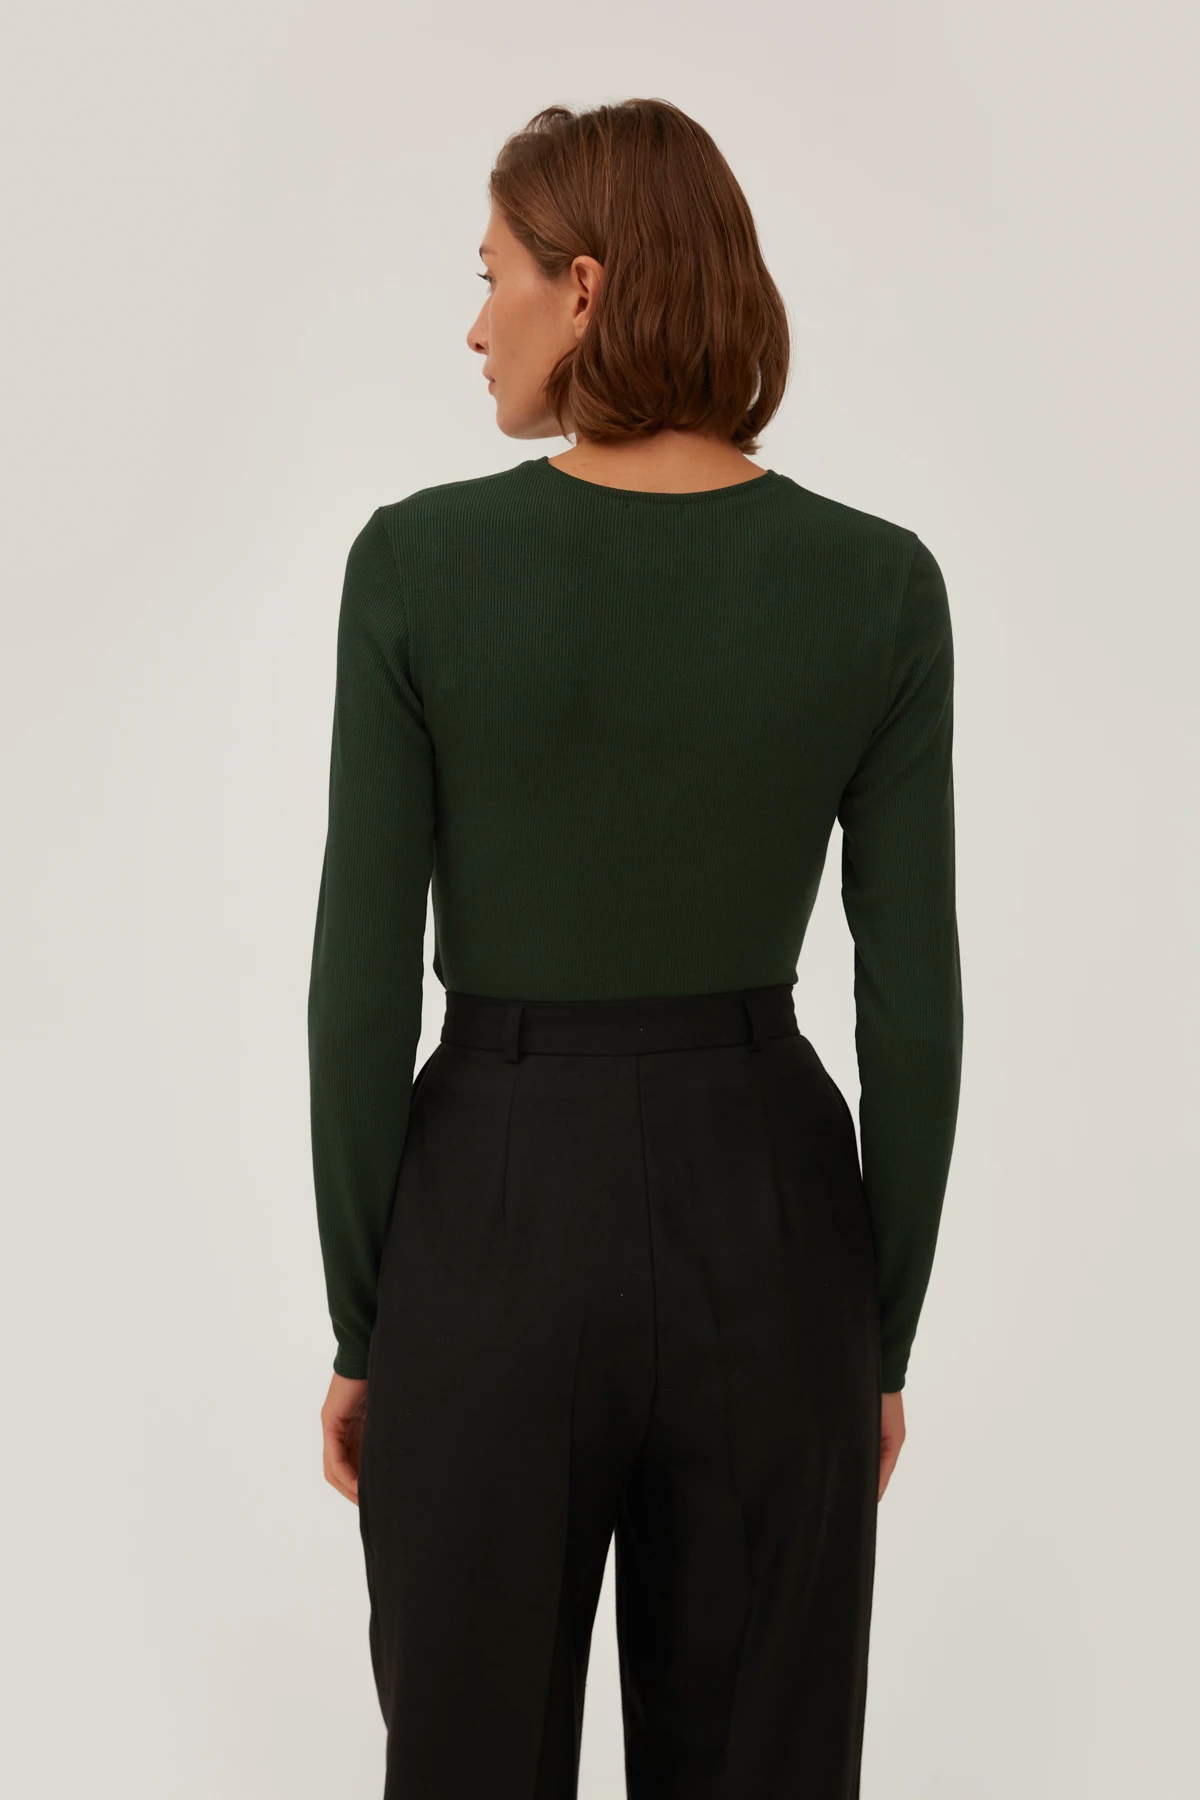 Green ribbed jersey jumper, photo 3